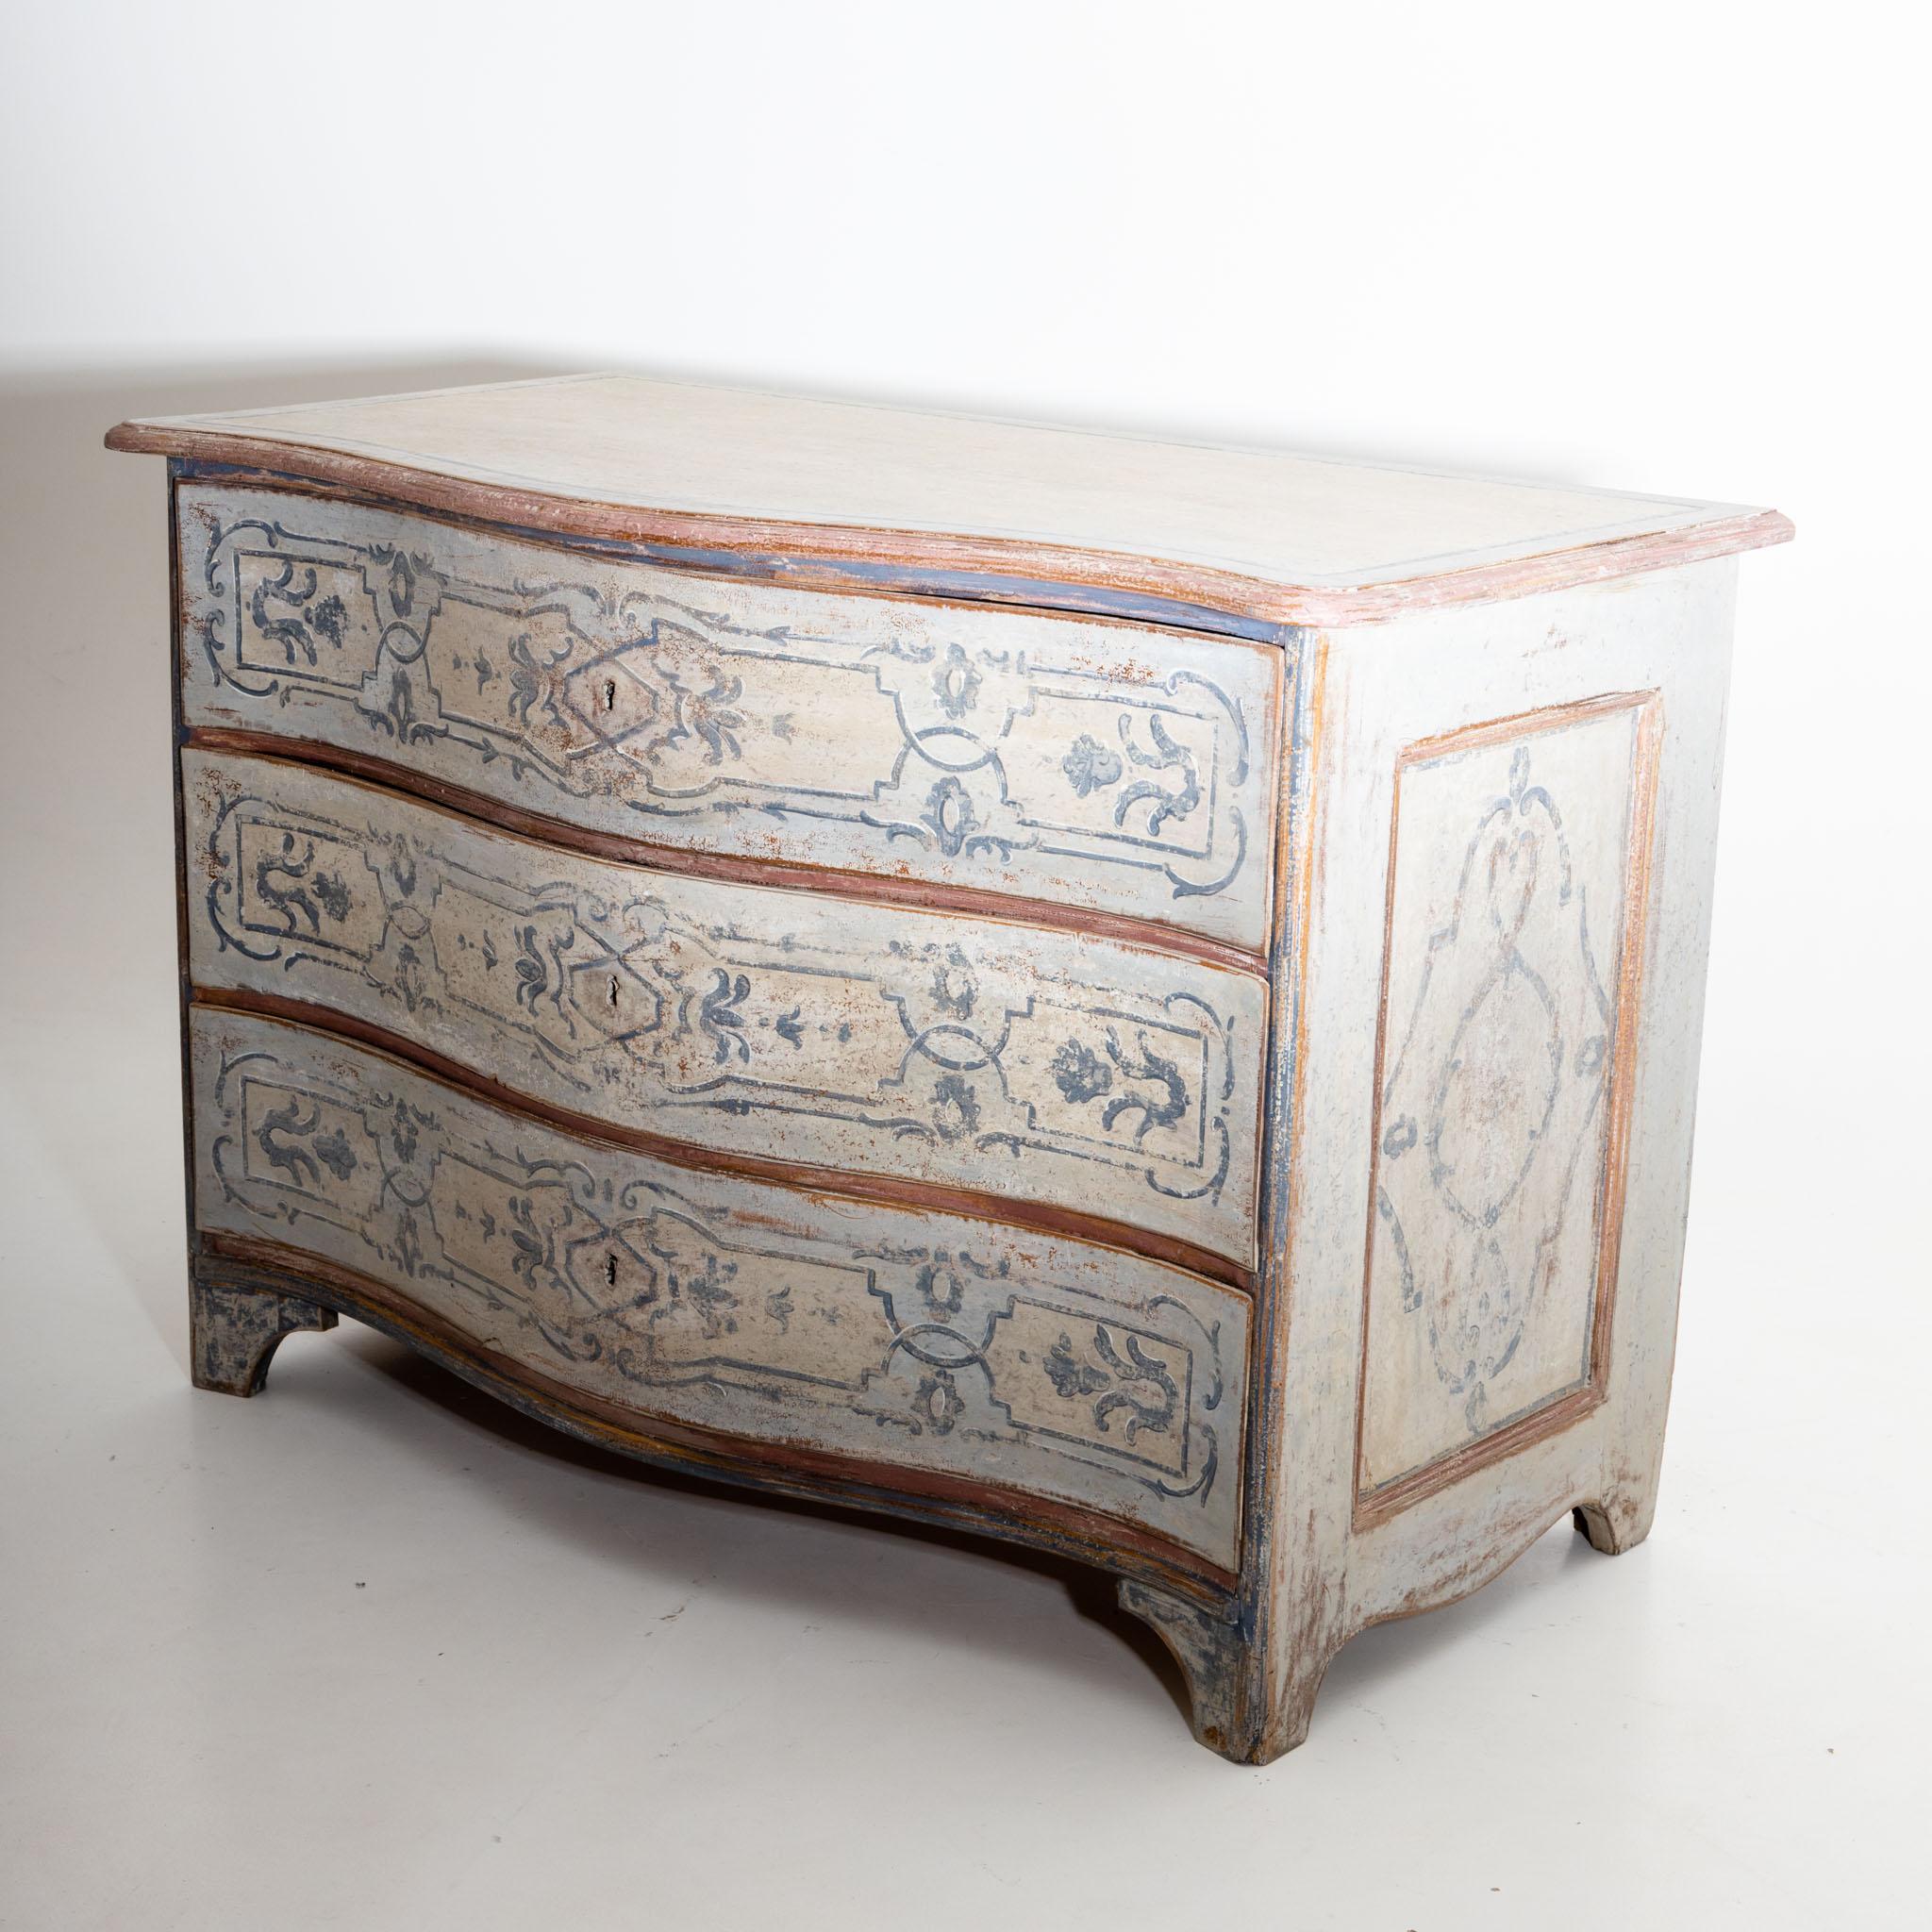 Hand painted Baroque commode in the French Provincial style with a curved front and coffered sides. The new setting in blue and brick red has an antique patina.